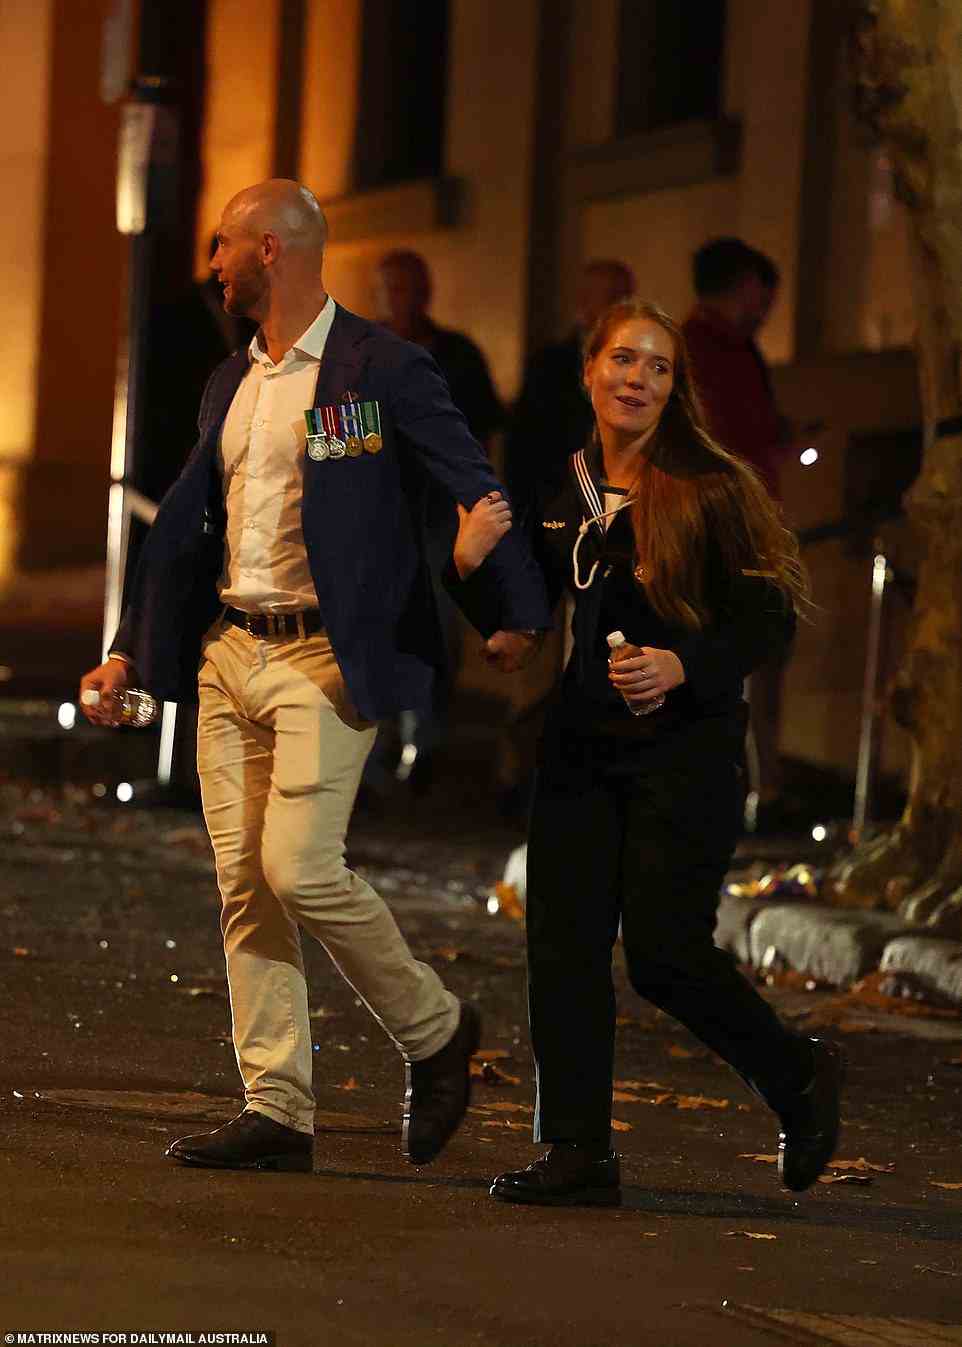 Two military personnel appeared to opt for water as the exited a venue in the Sydney CBD on Monday